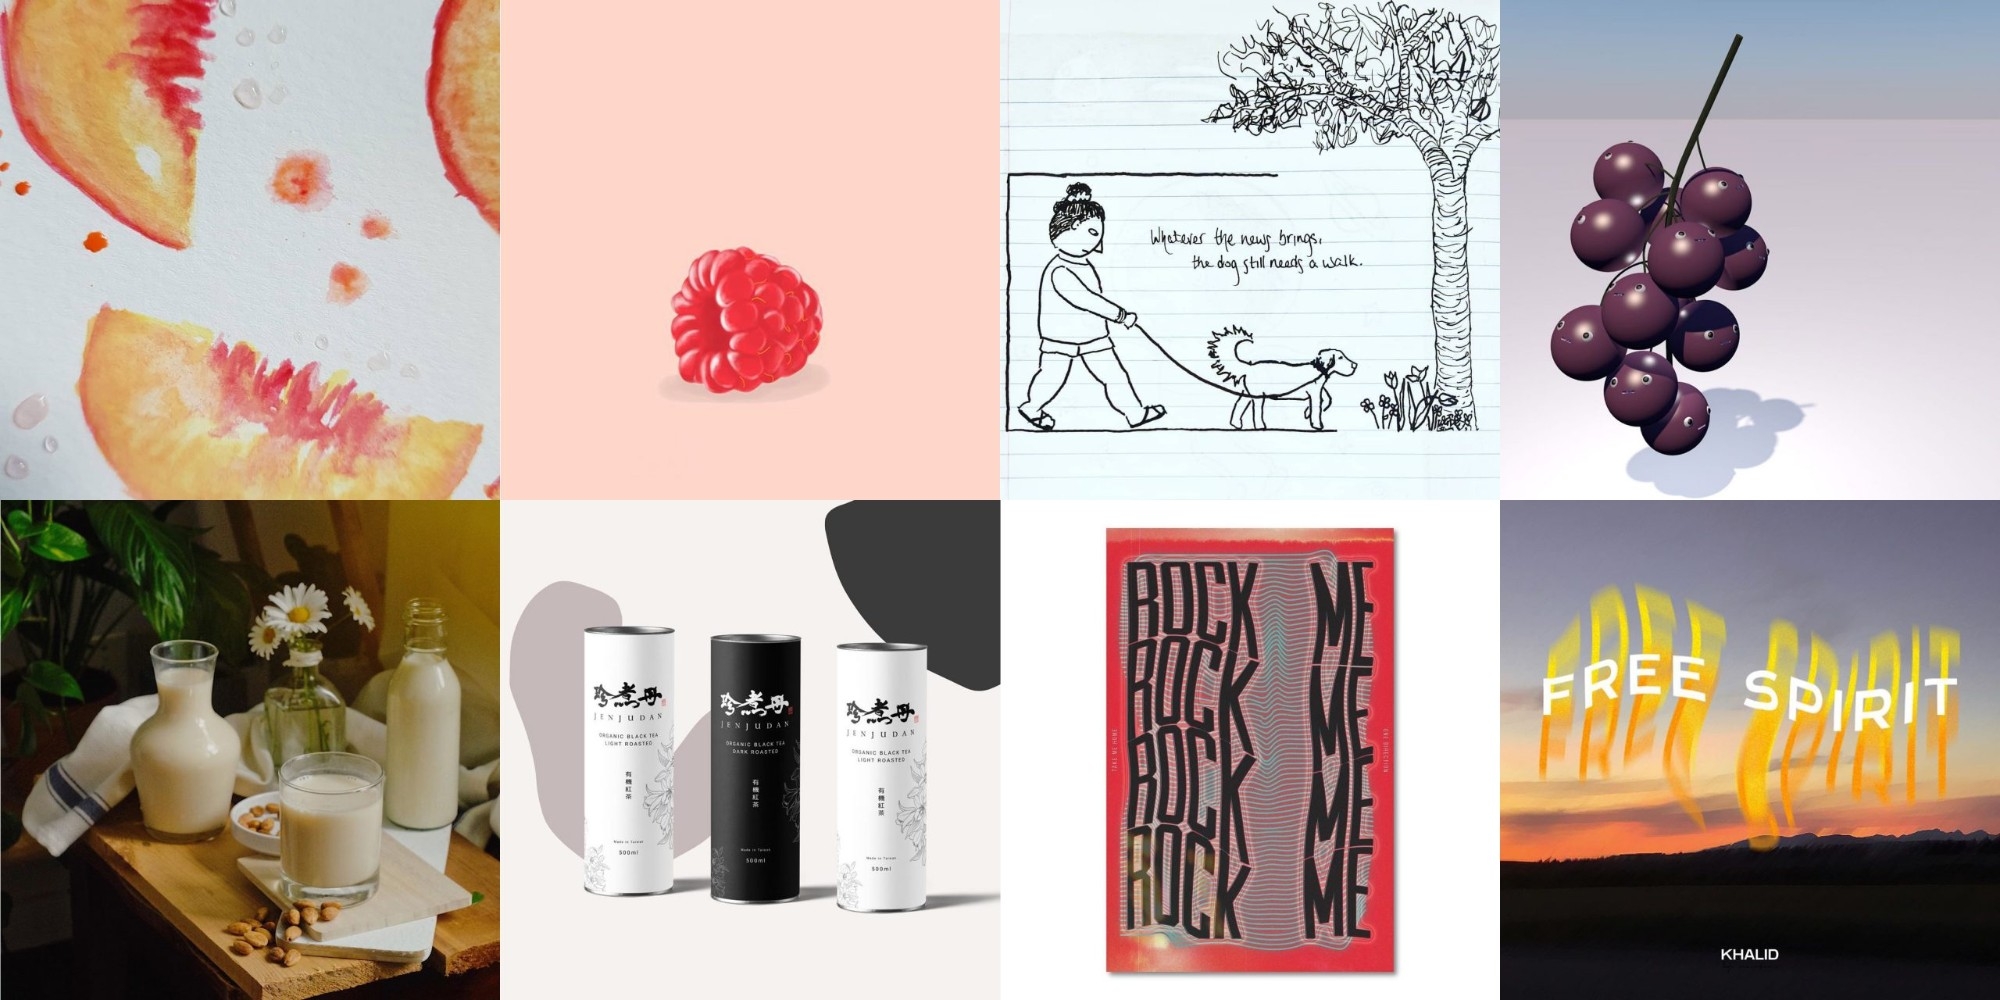 A collage of 8 designs created by Pub 438, Design Awareness in Publishing Process and Products, students under the guidance of Professor Mauve Page. 